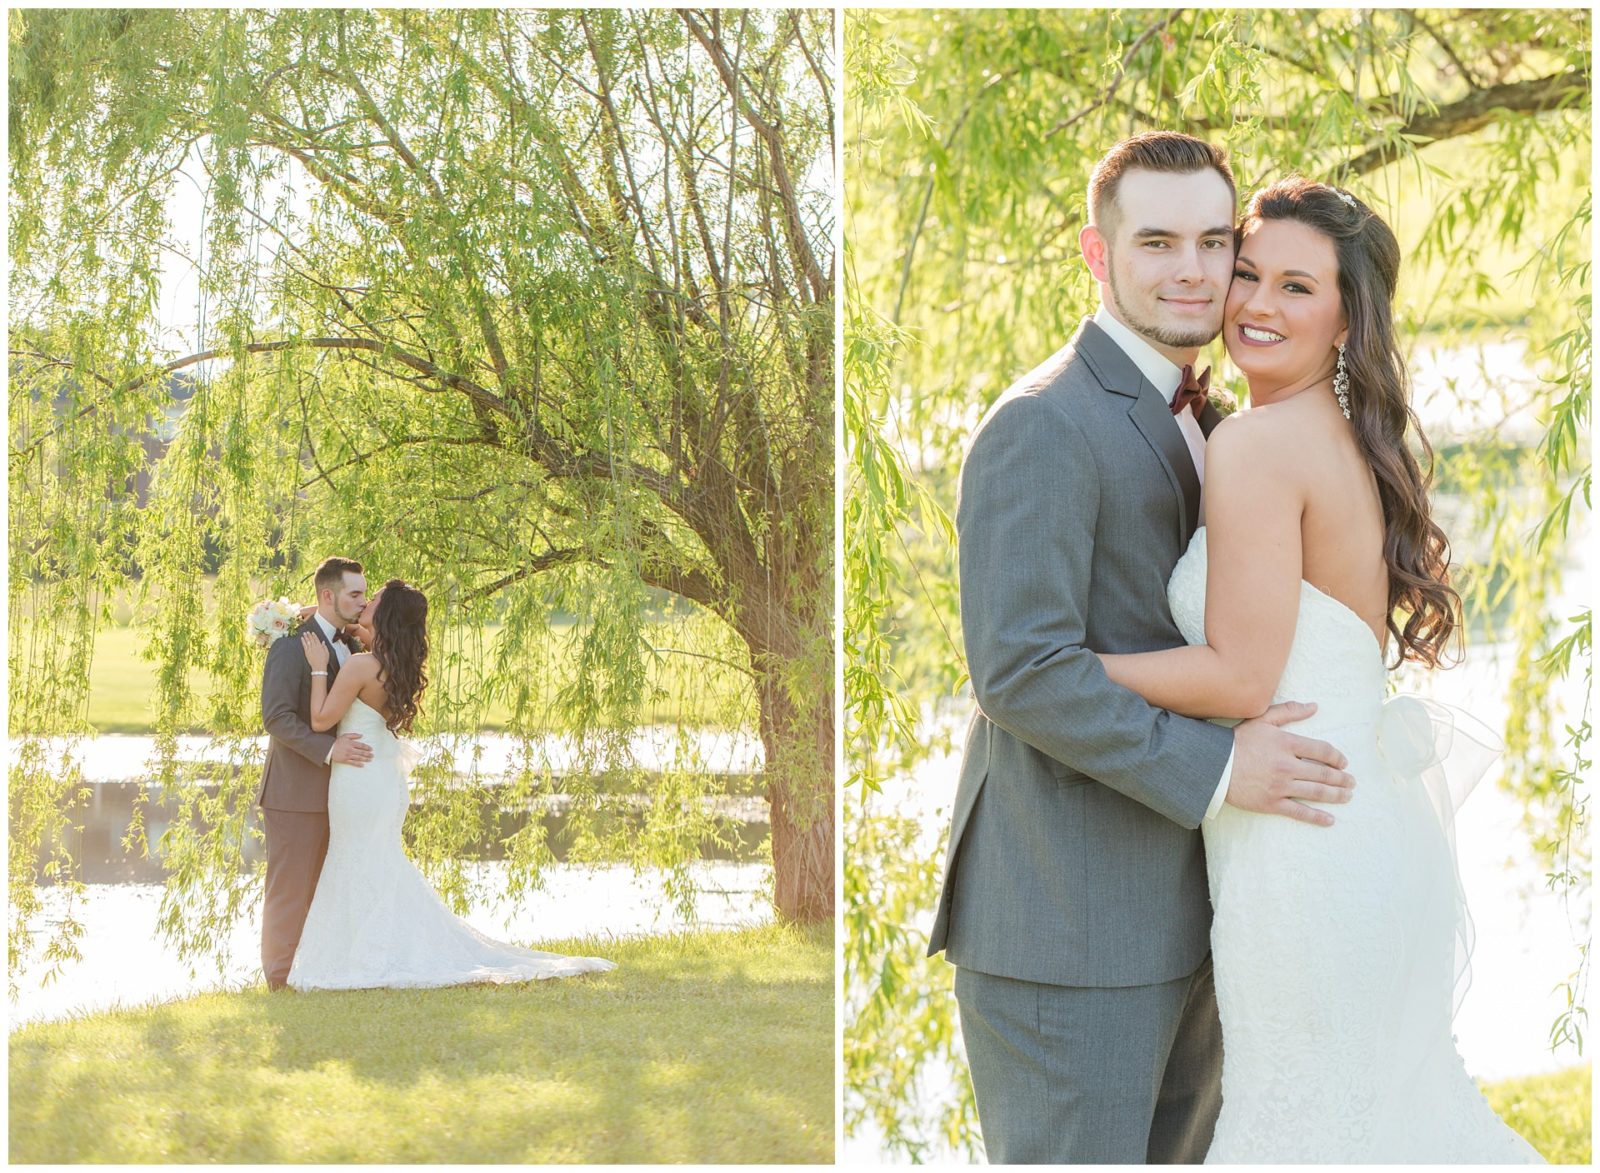 Bride and groom wedding photos at Champion Trace Golf Club in Nicholasville, KY